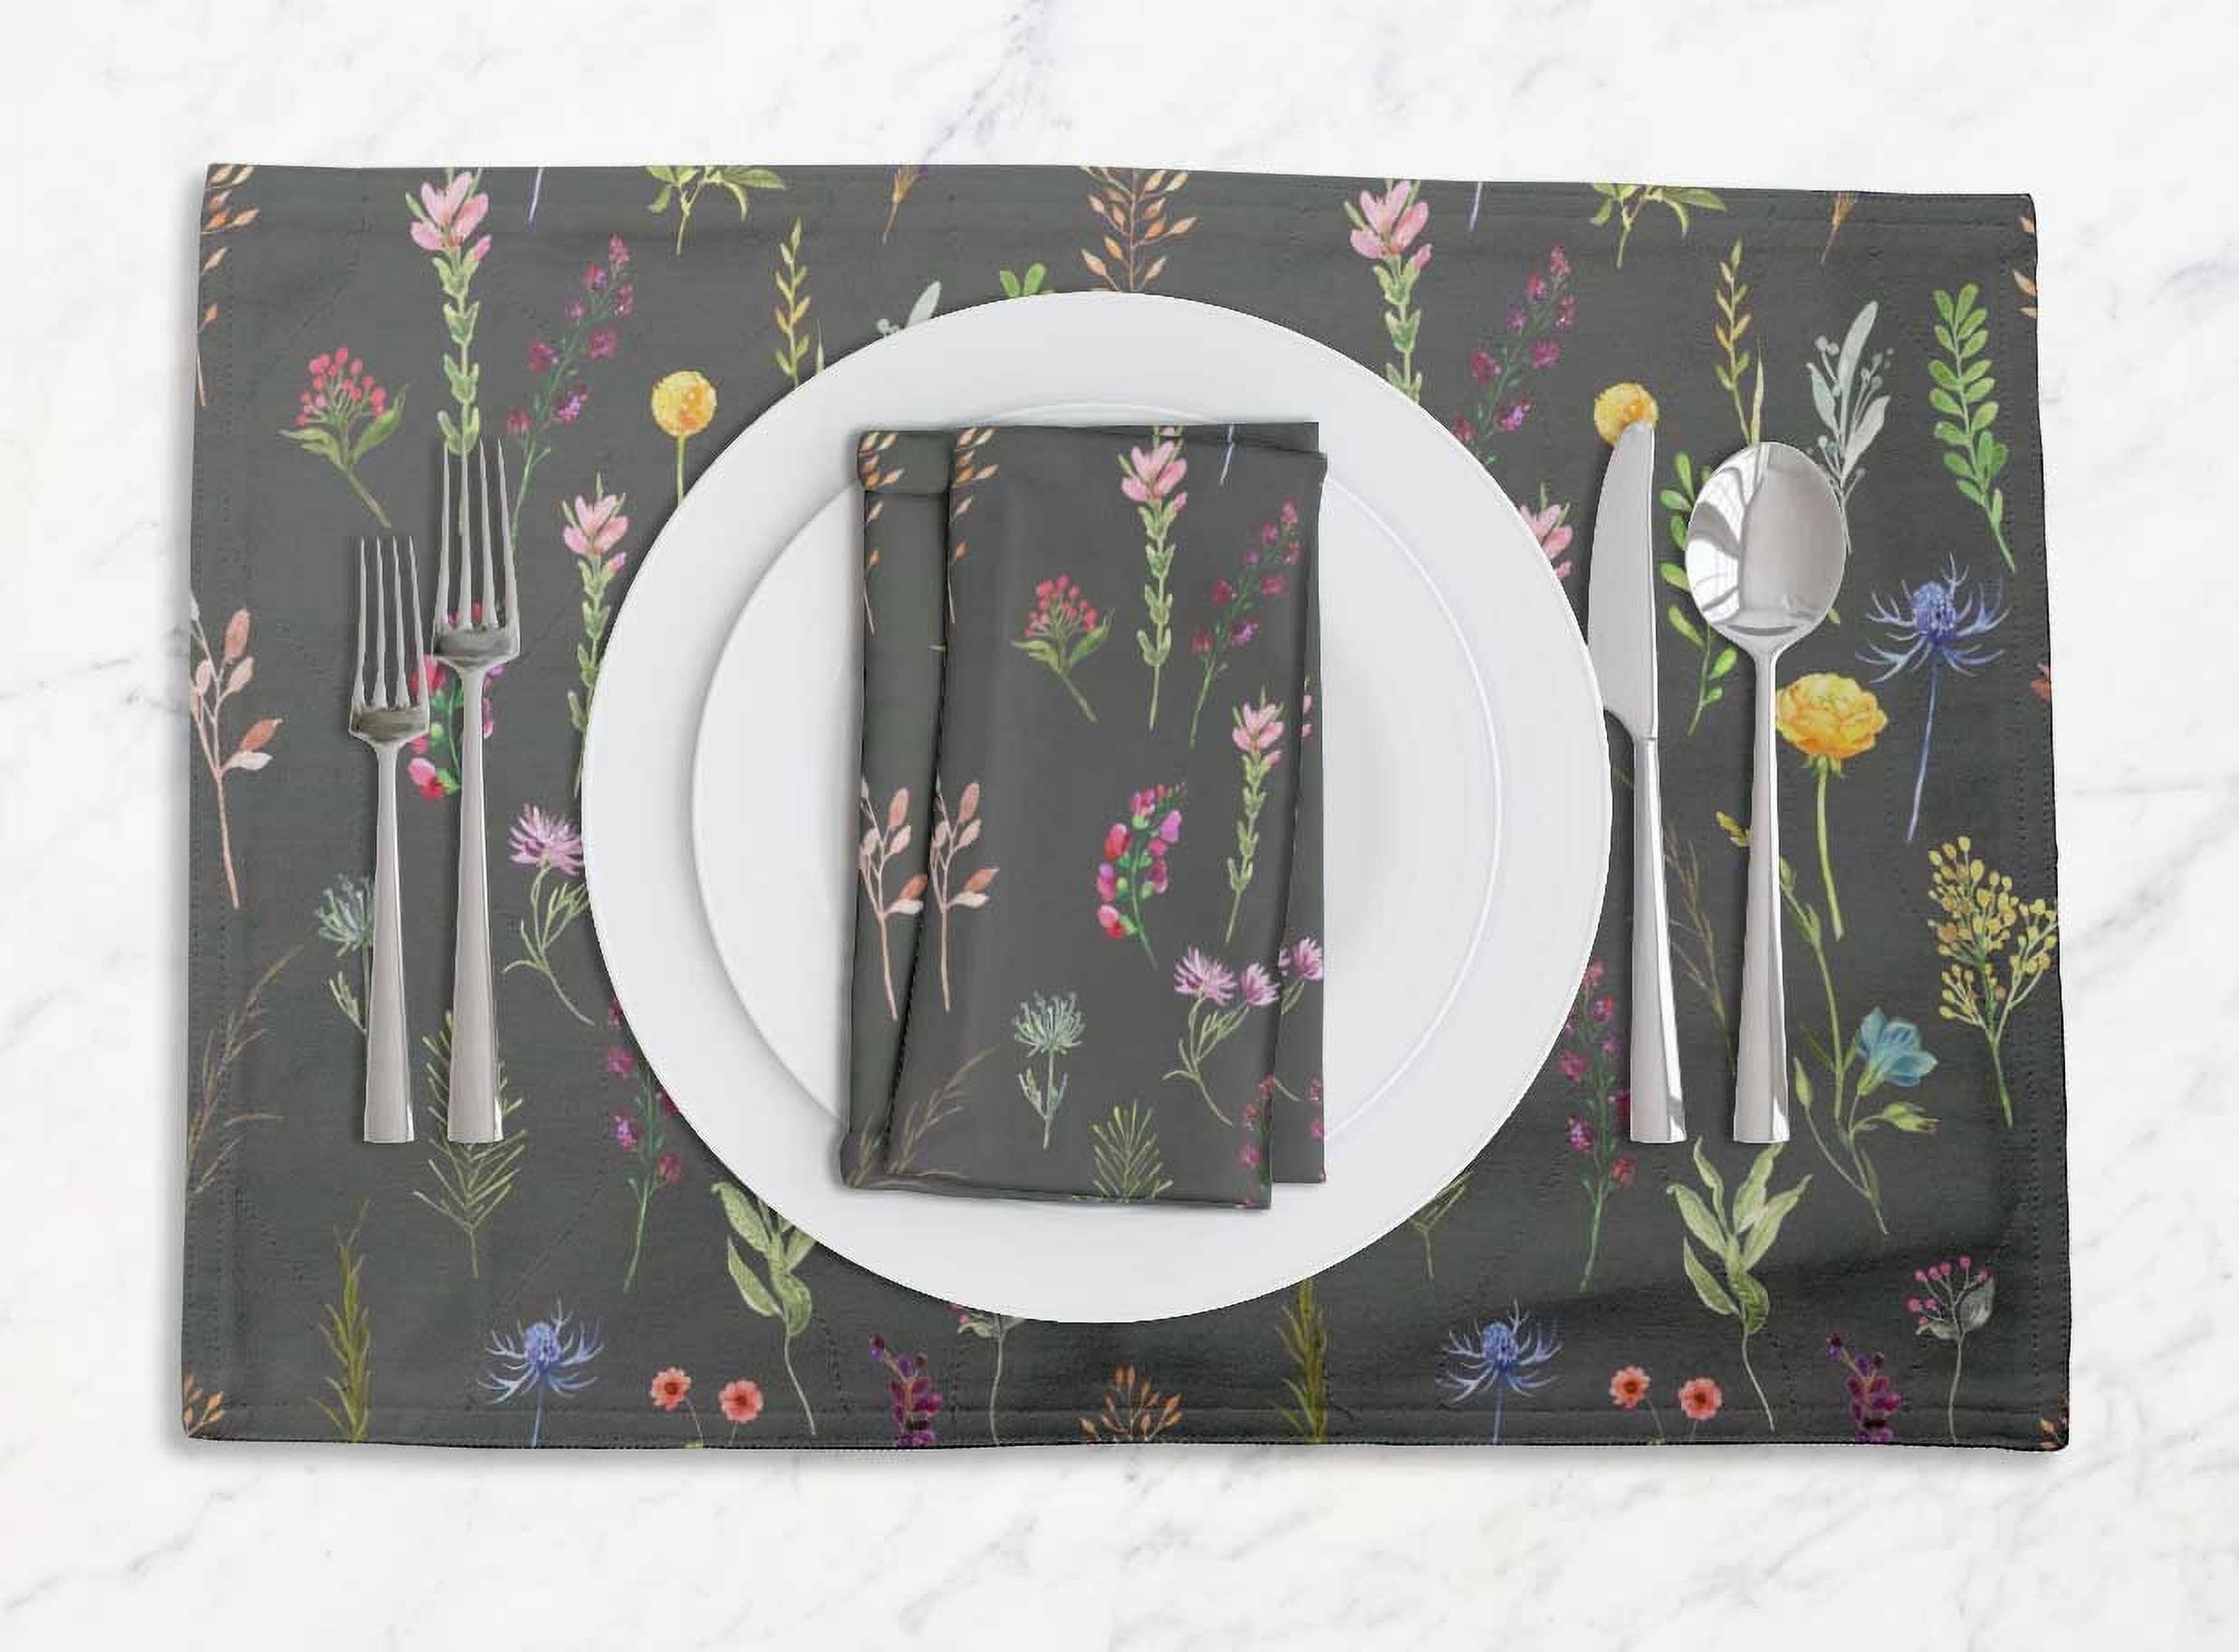 Details about   S4Sassy Ranunculus & Sweetpea Leaves  Tablemats With Napkins set-LF-627E 